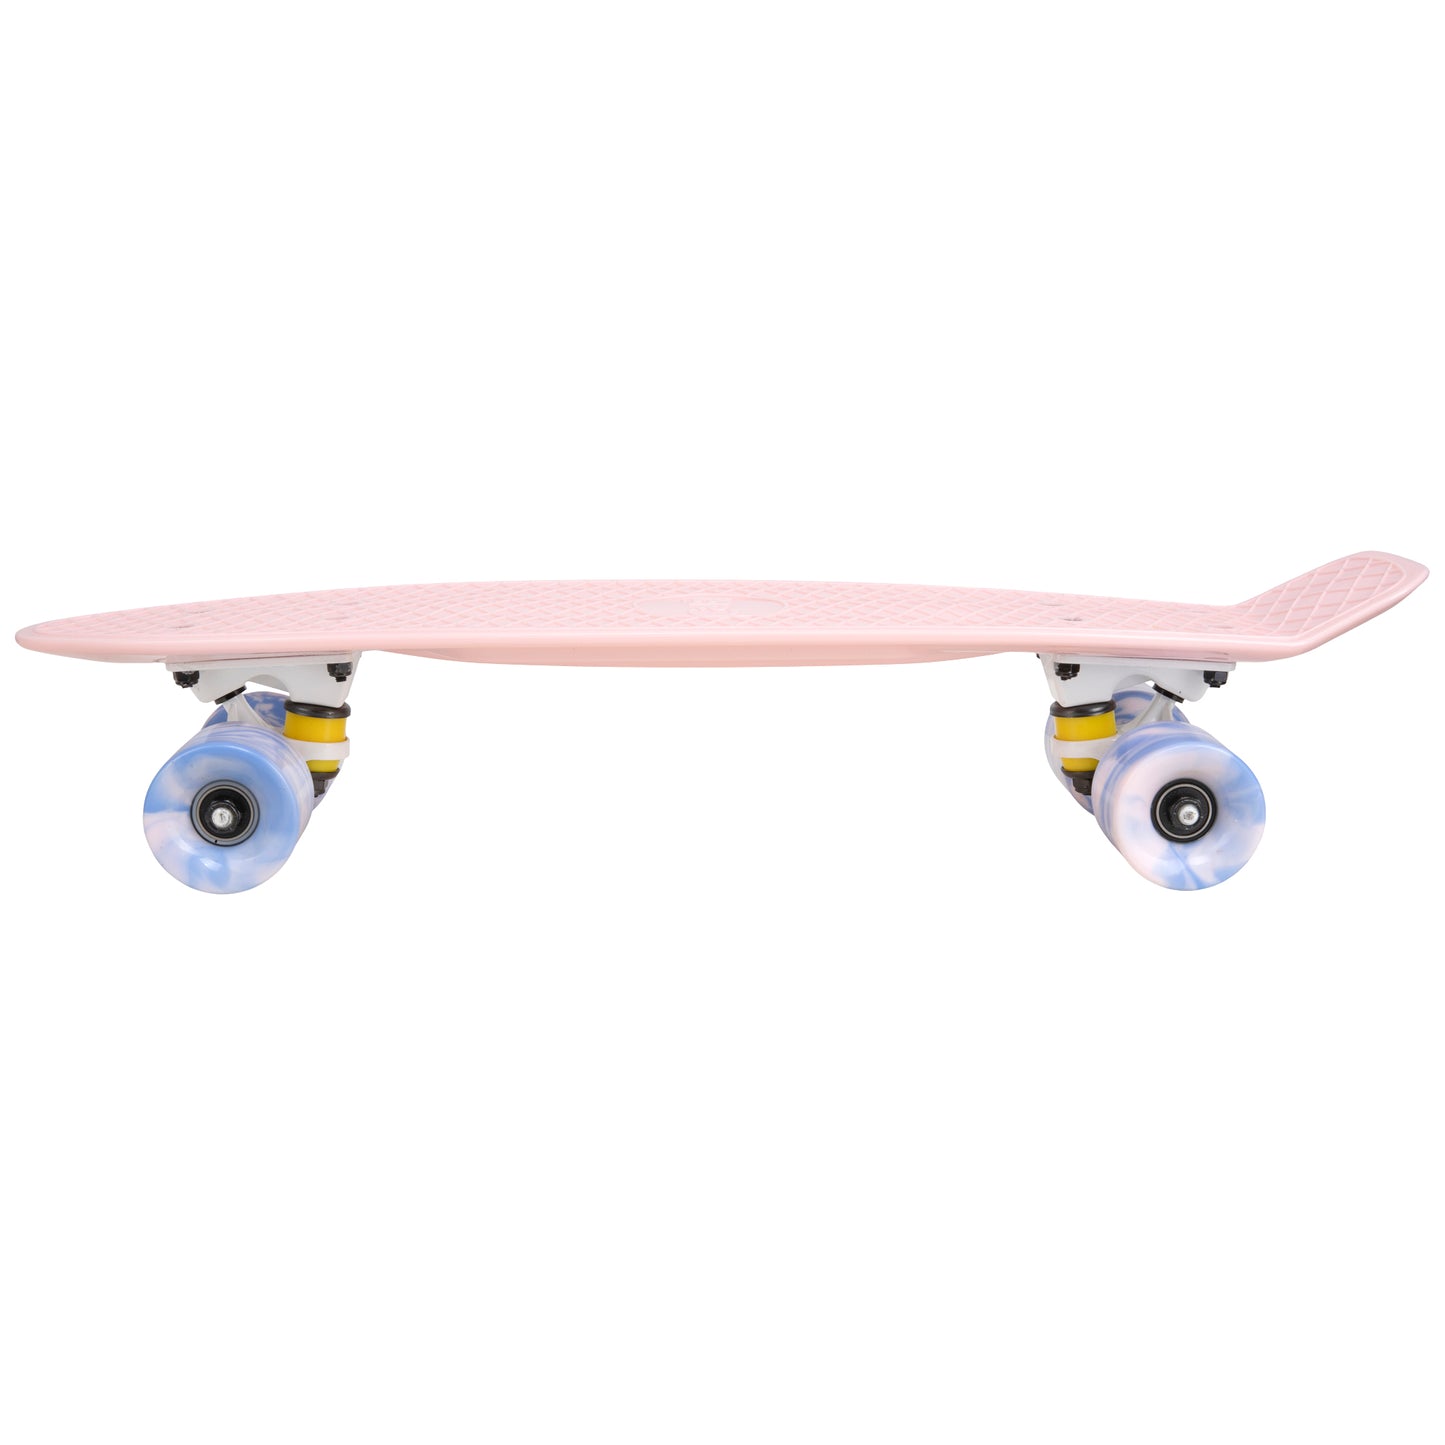 Cal 7 Lotus 22.5” Mini Cruiser with Swirl Wheels: a plastic pastel pink deck with 60mm 78A blue and light pink swirl wheels. 